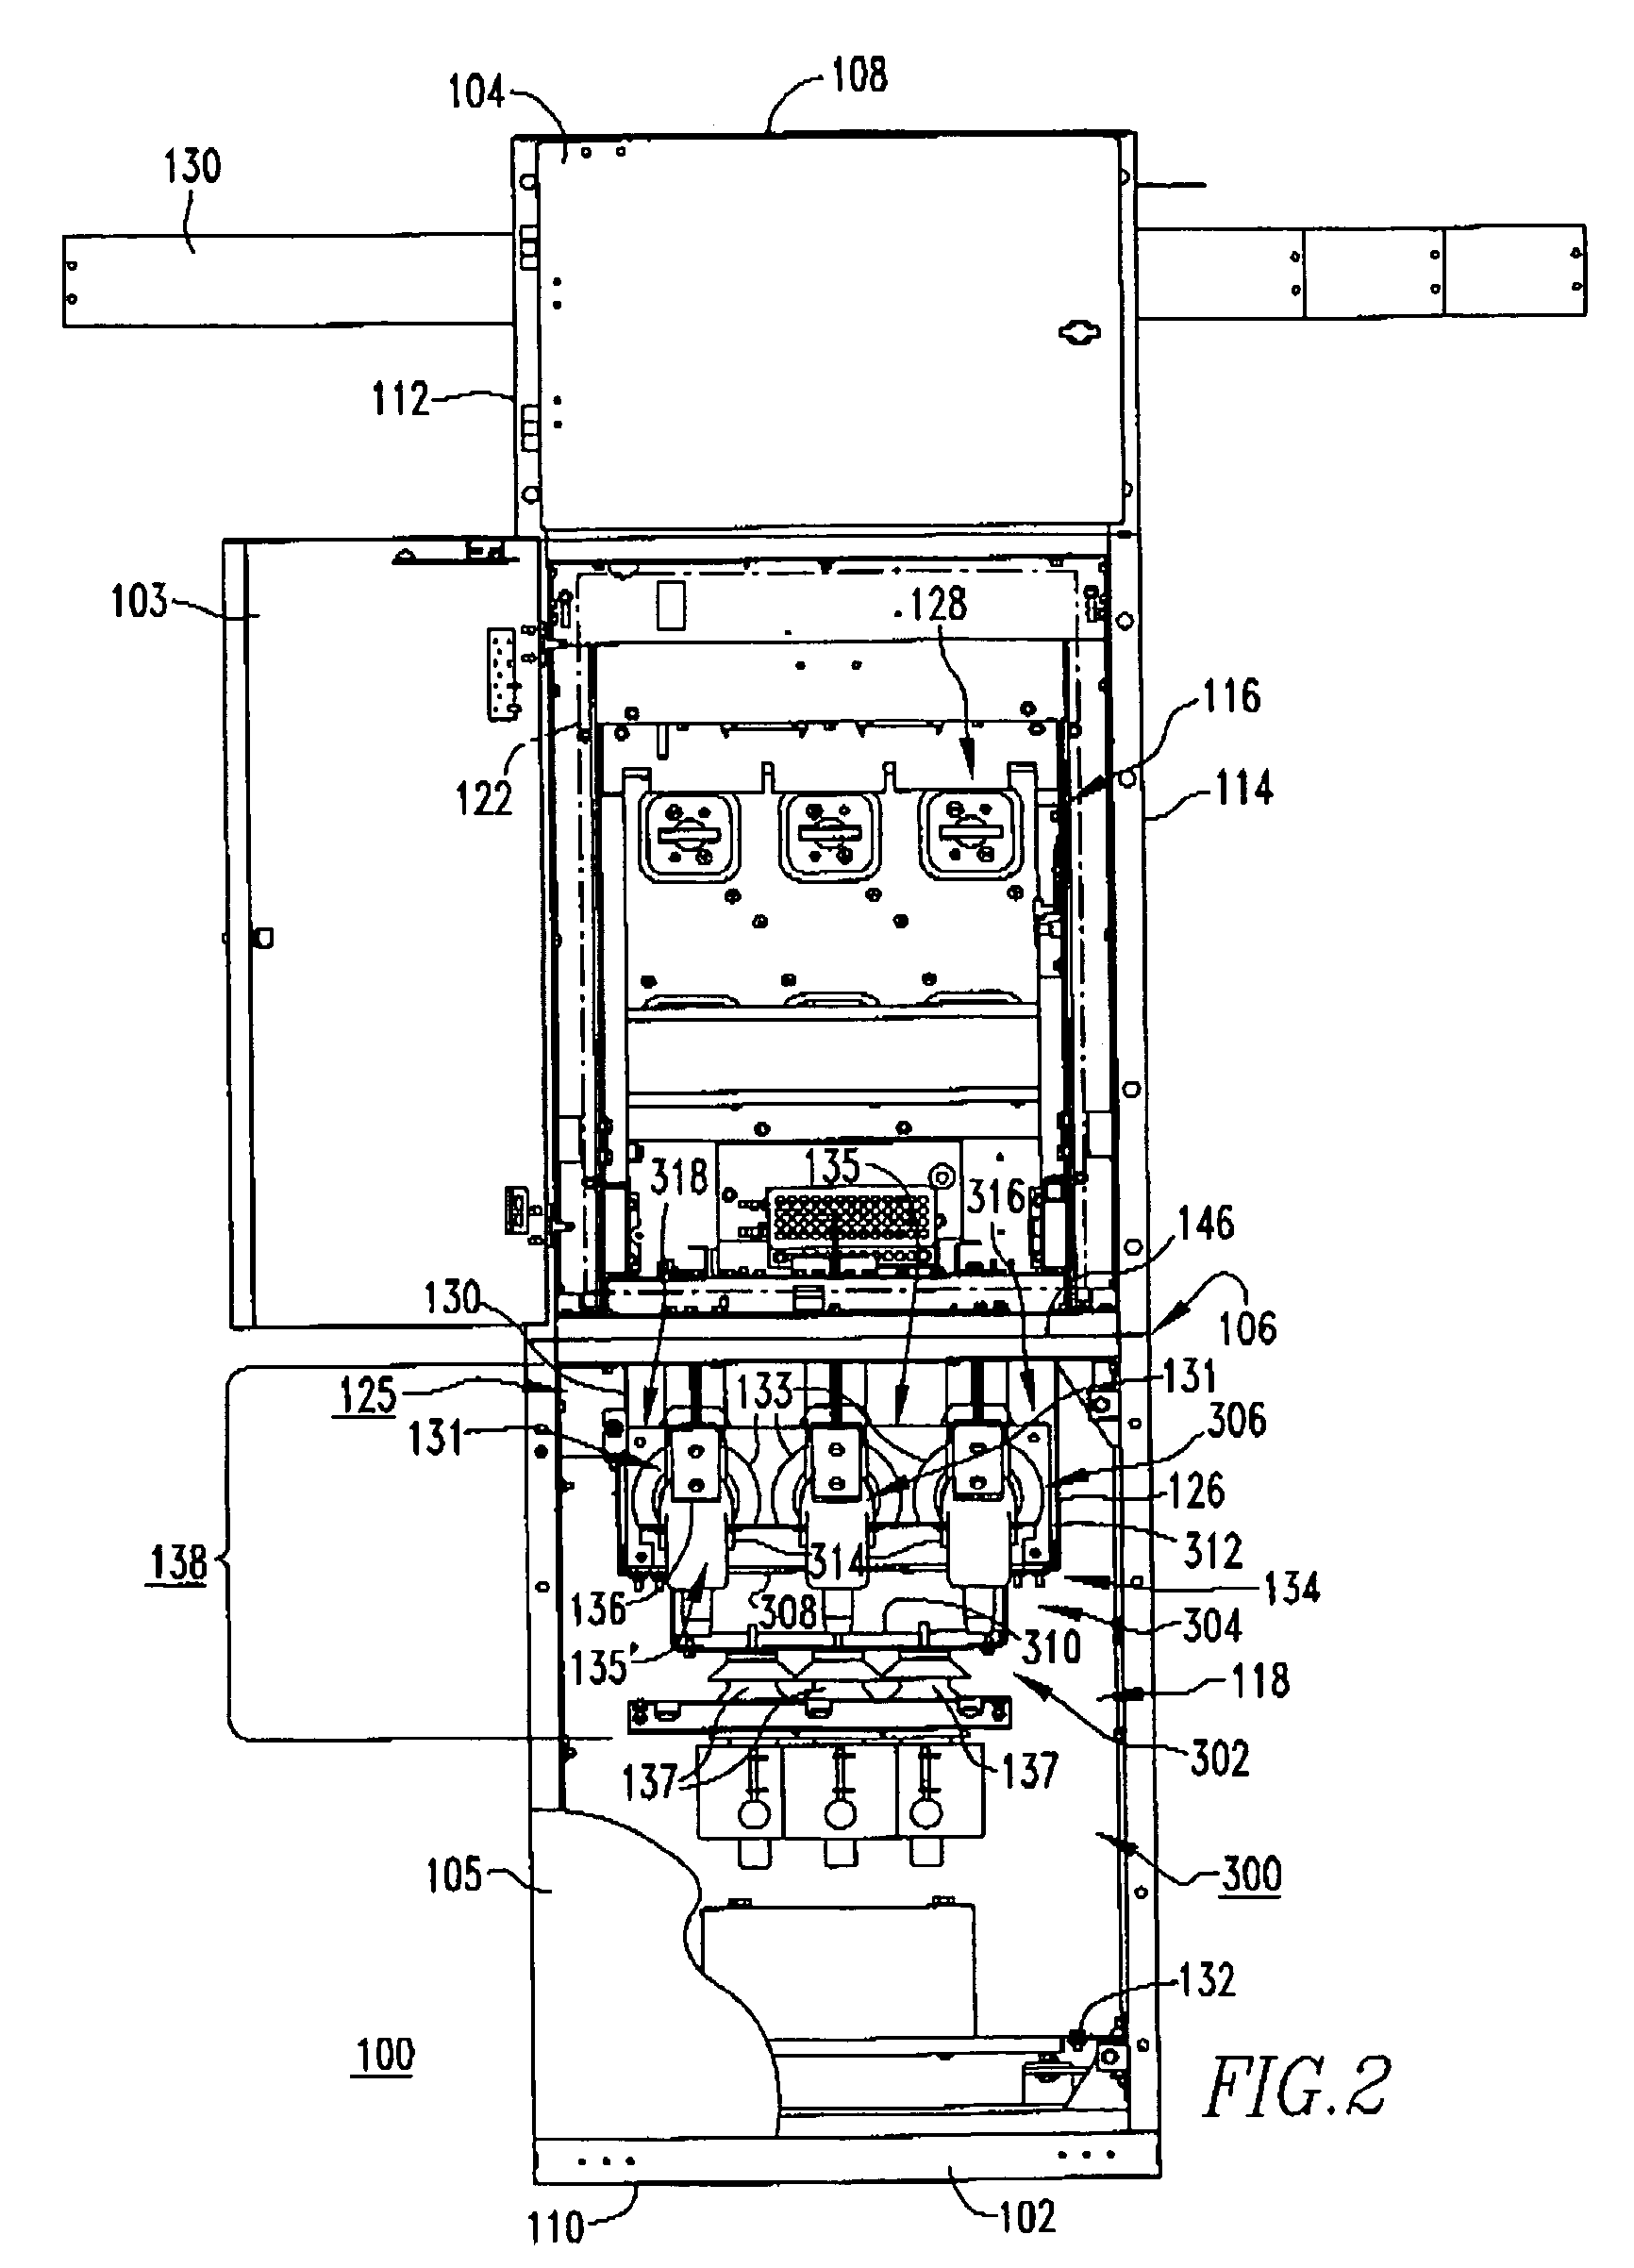 Front access electrical enclosure and electrical bus assembly therefor